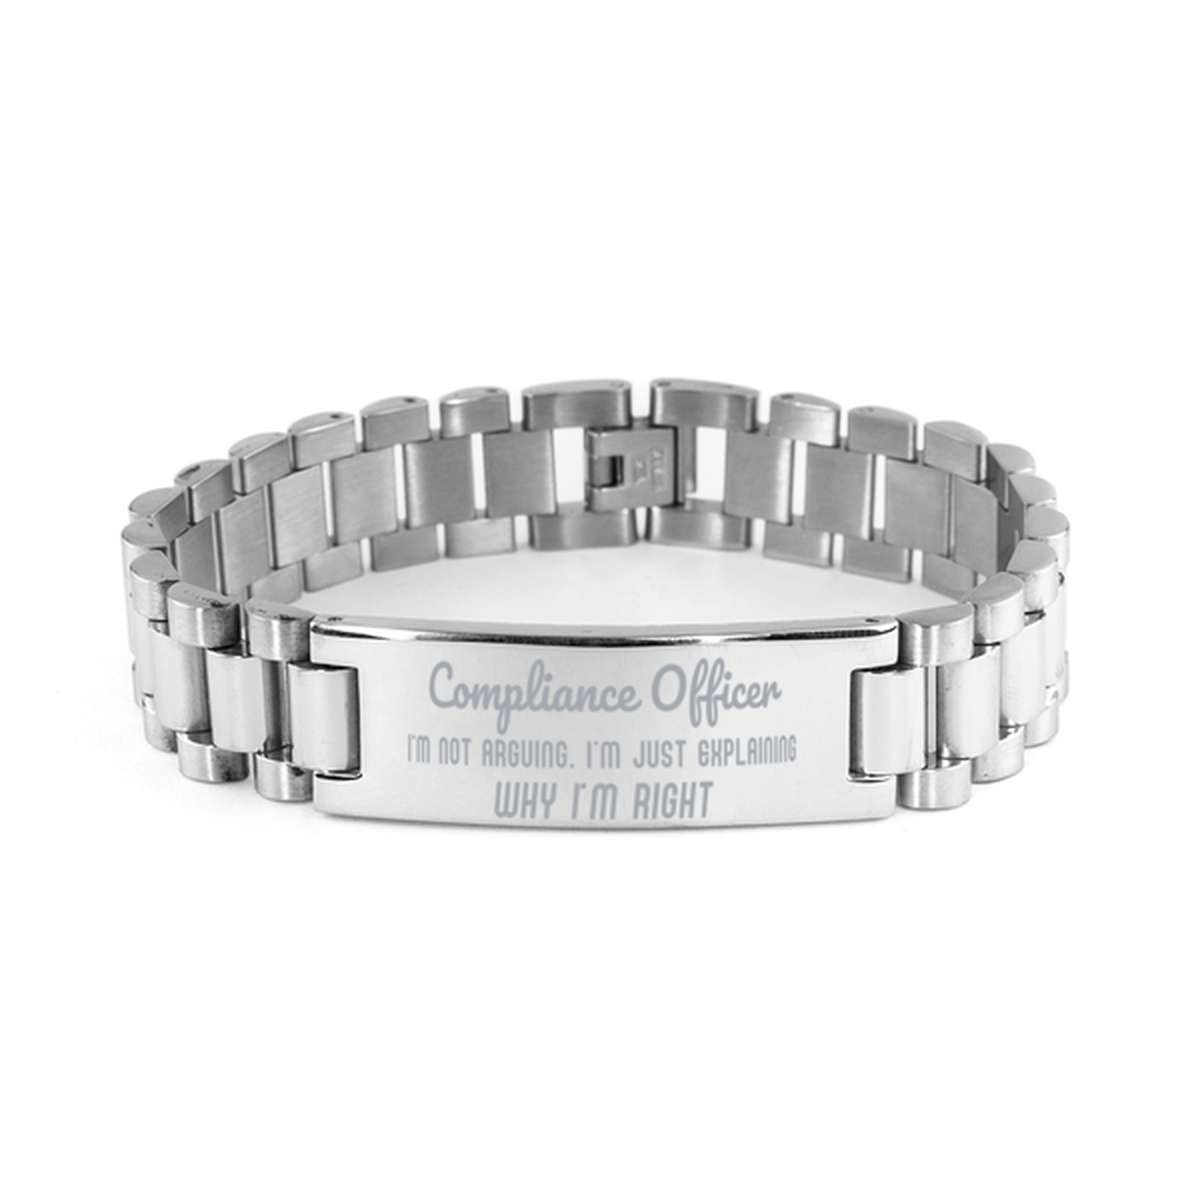 Compliance Officer I'm not Arguing. I'm Just Explaining Why I'm RIGHT Ladder Stainless Steel Bracelet, Graduation Birthday Christmas Compliance Officer Gifts For Compliance Officer Funny Saying Quote Present for Men Women Coworker